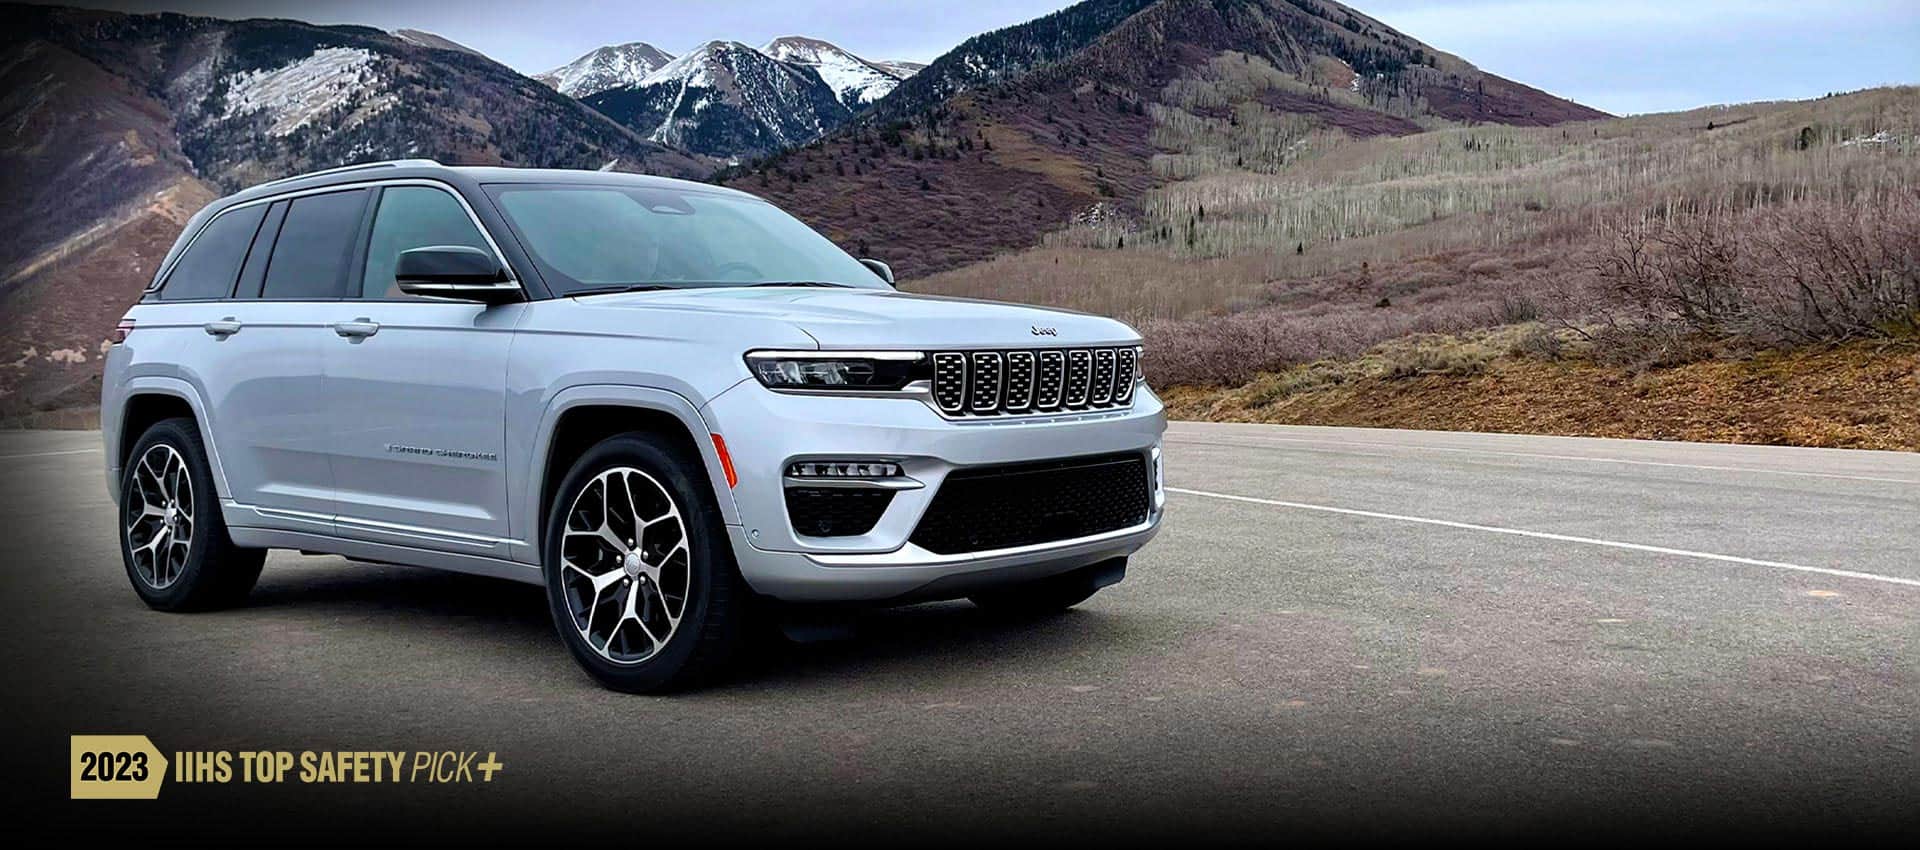 An angled profile of a white 2023 Jeep Grand Cherokee Summit Reserve with a mountain range in the background. The 2023 IIHS Top Safety Pick Plus logo.